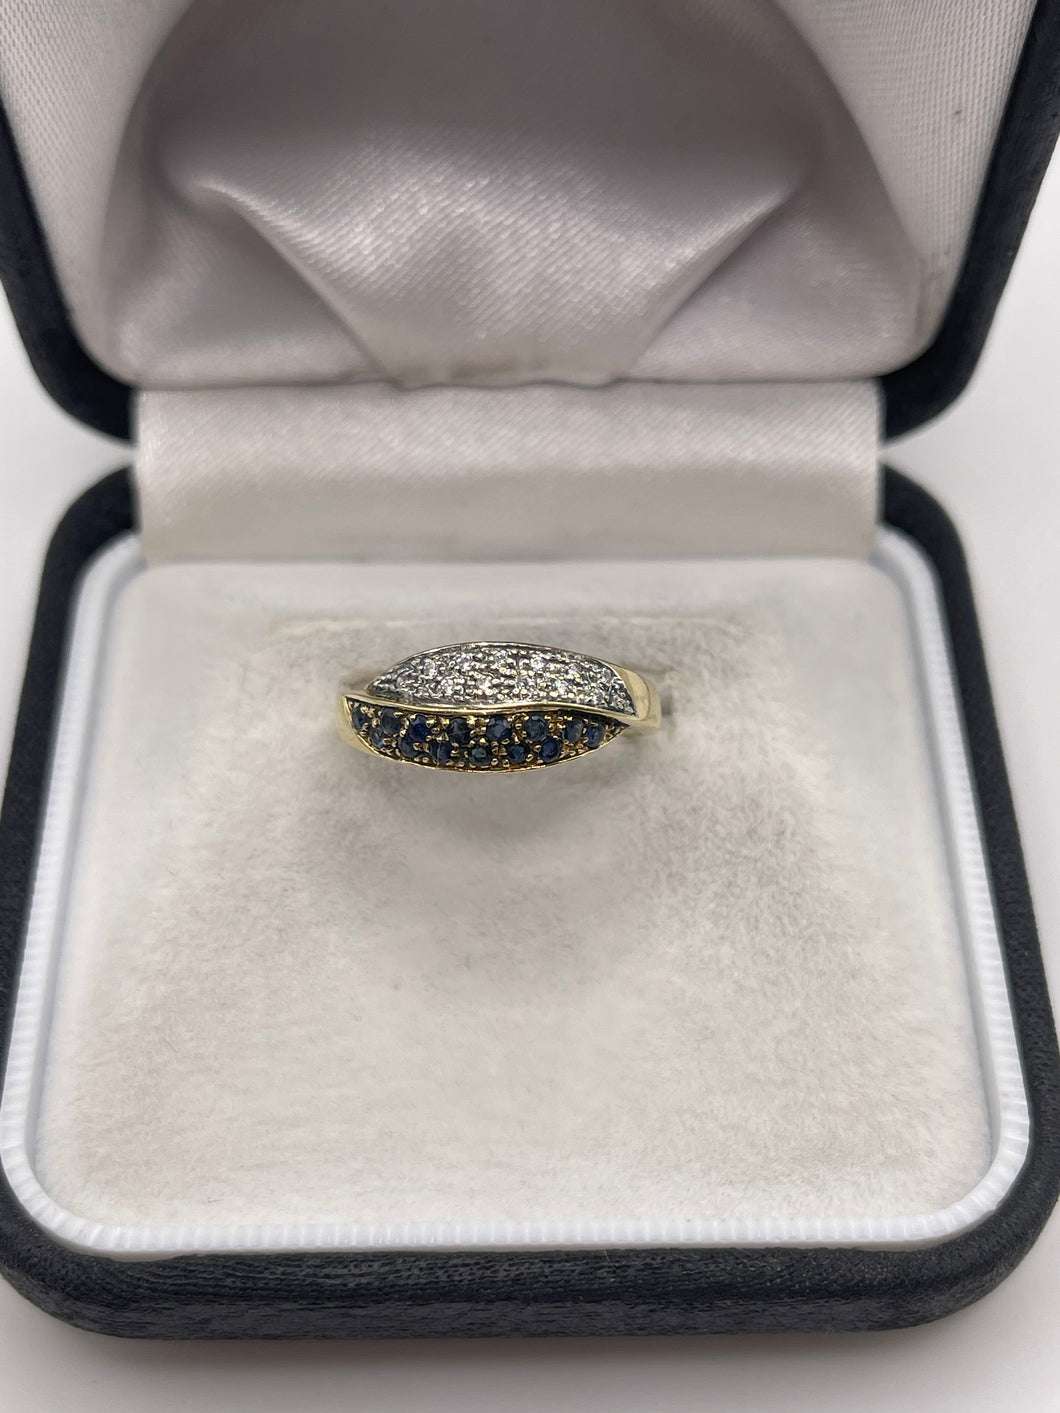 14ct gold sapphire and diamond ring